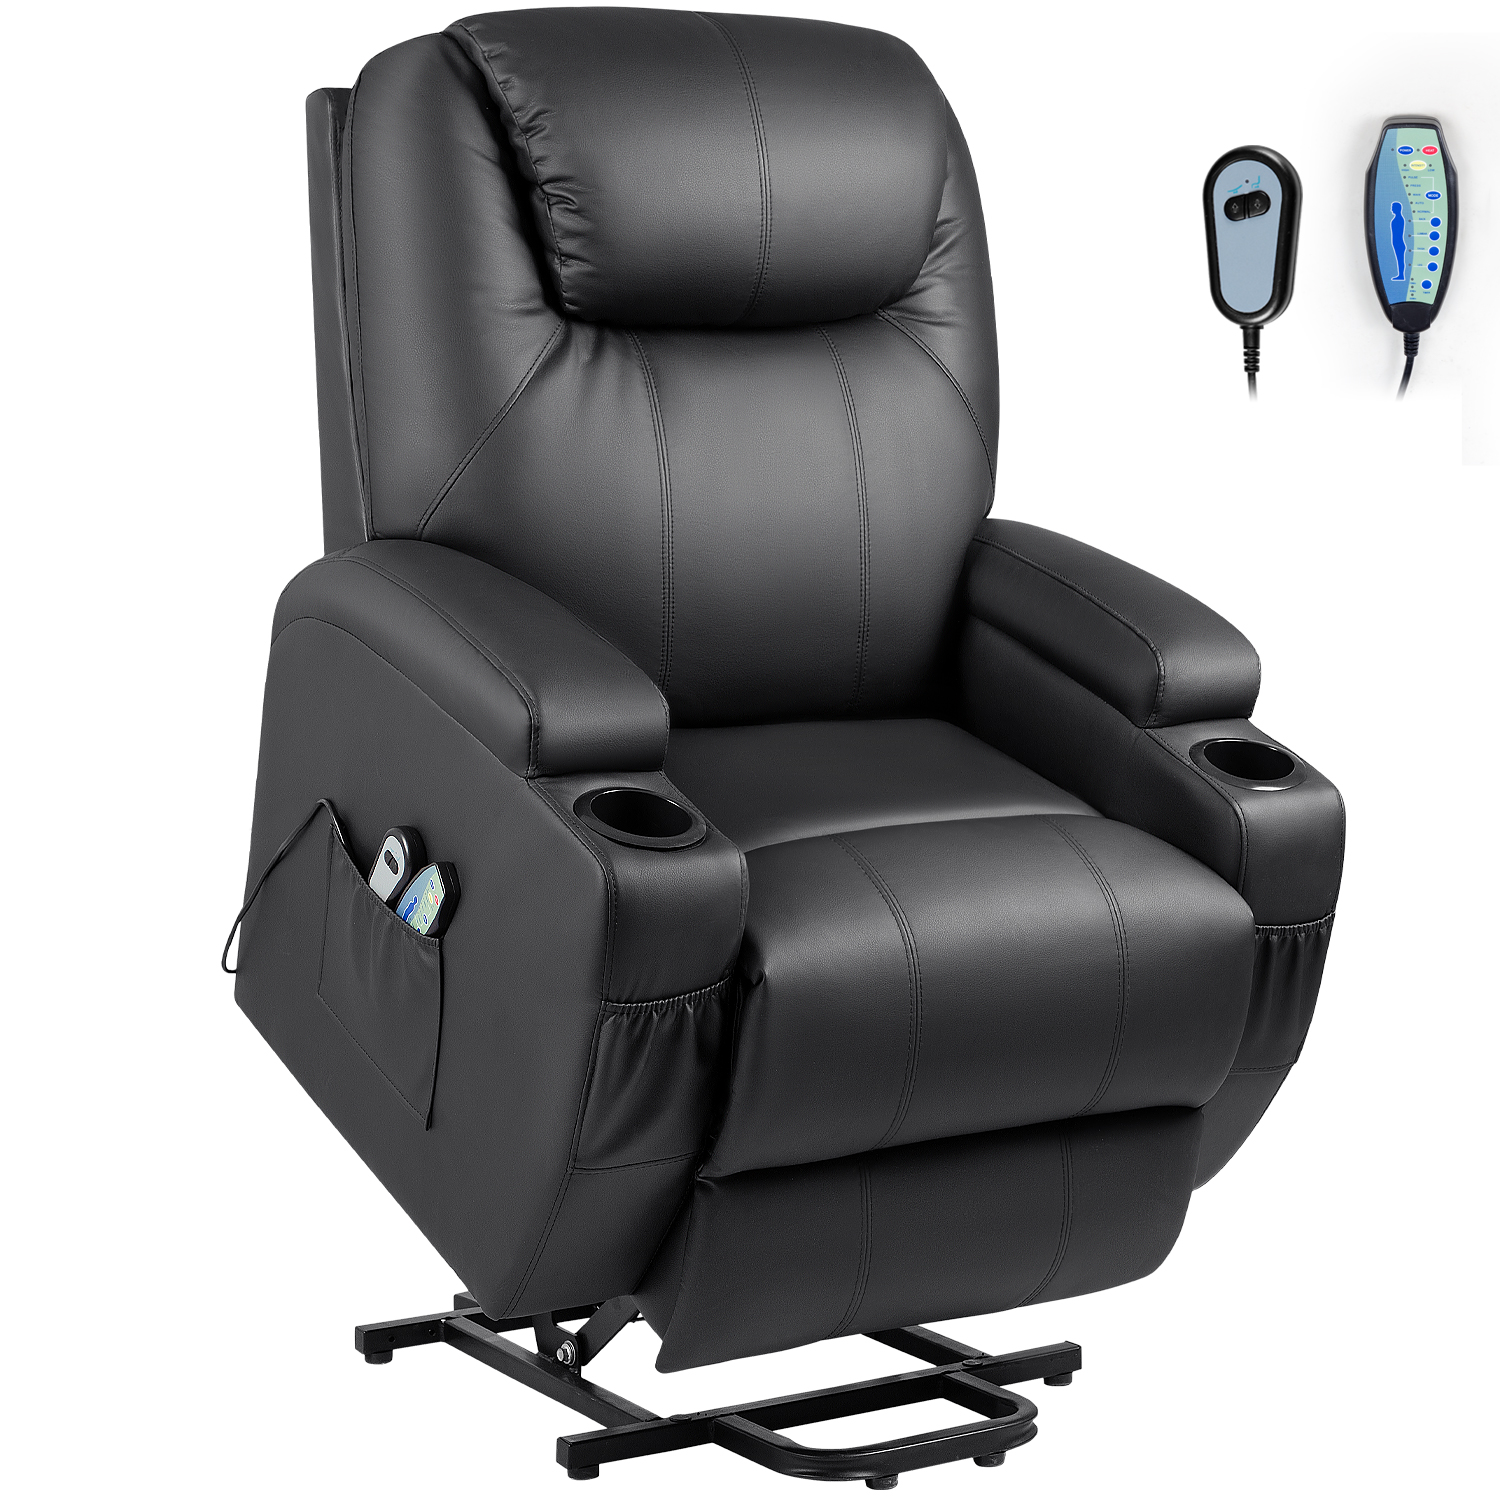 [Home Depot] Black Leather Standard (No Motion) Recliner with Power Lift, Message and Heating $269